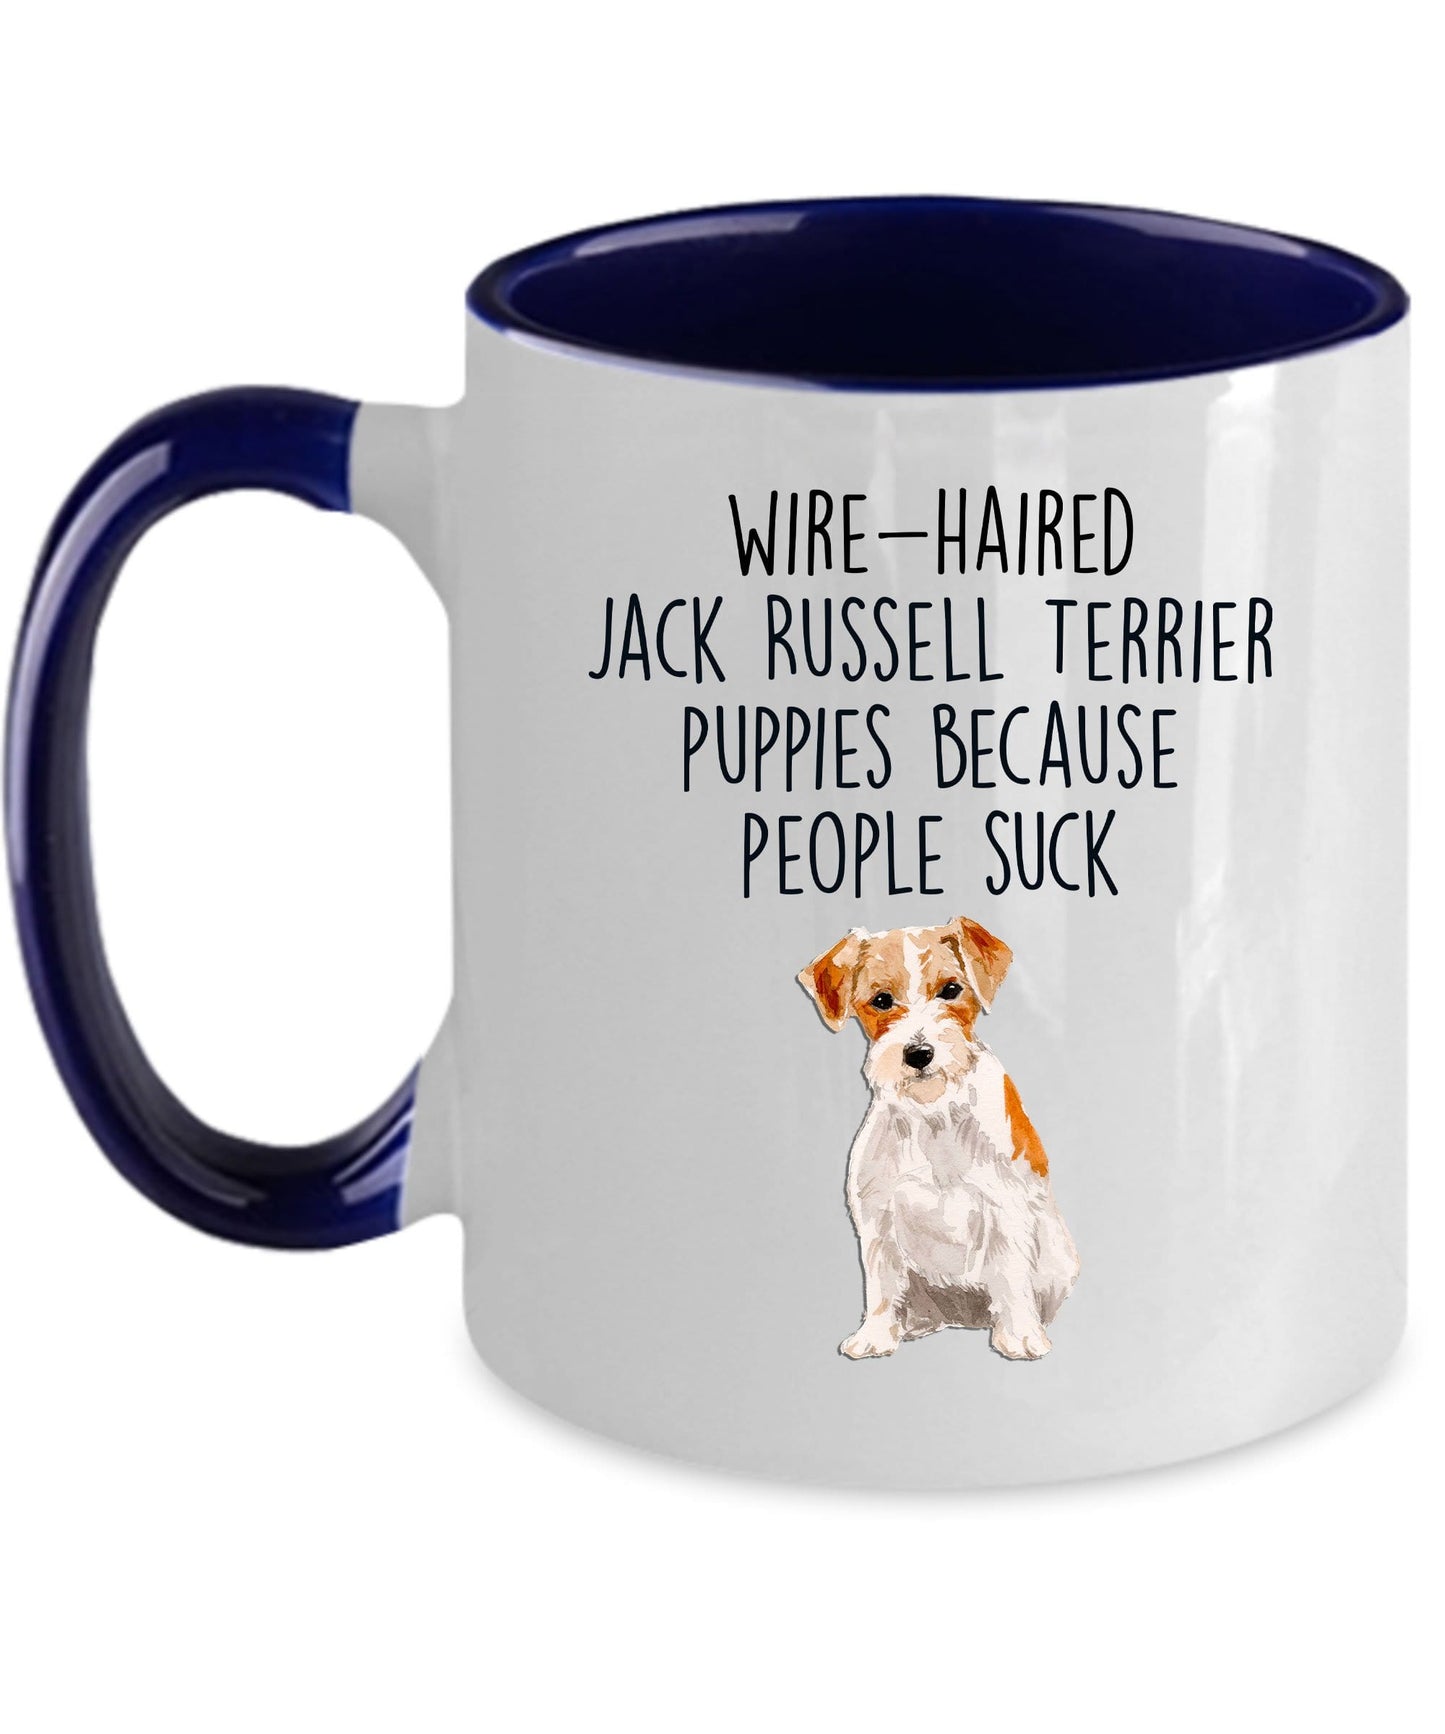 Wire-haired Jack Russell Terrier Puppies Because People Suck Funny Dog Custom Ceramic Coffee Mug